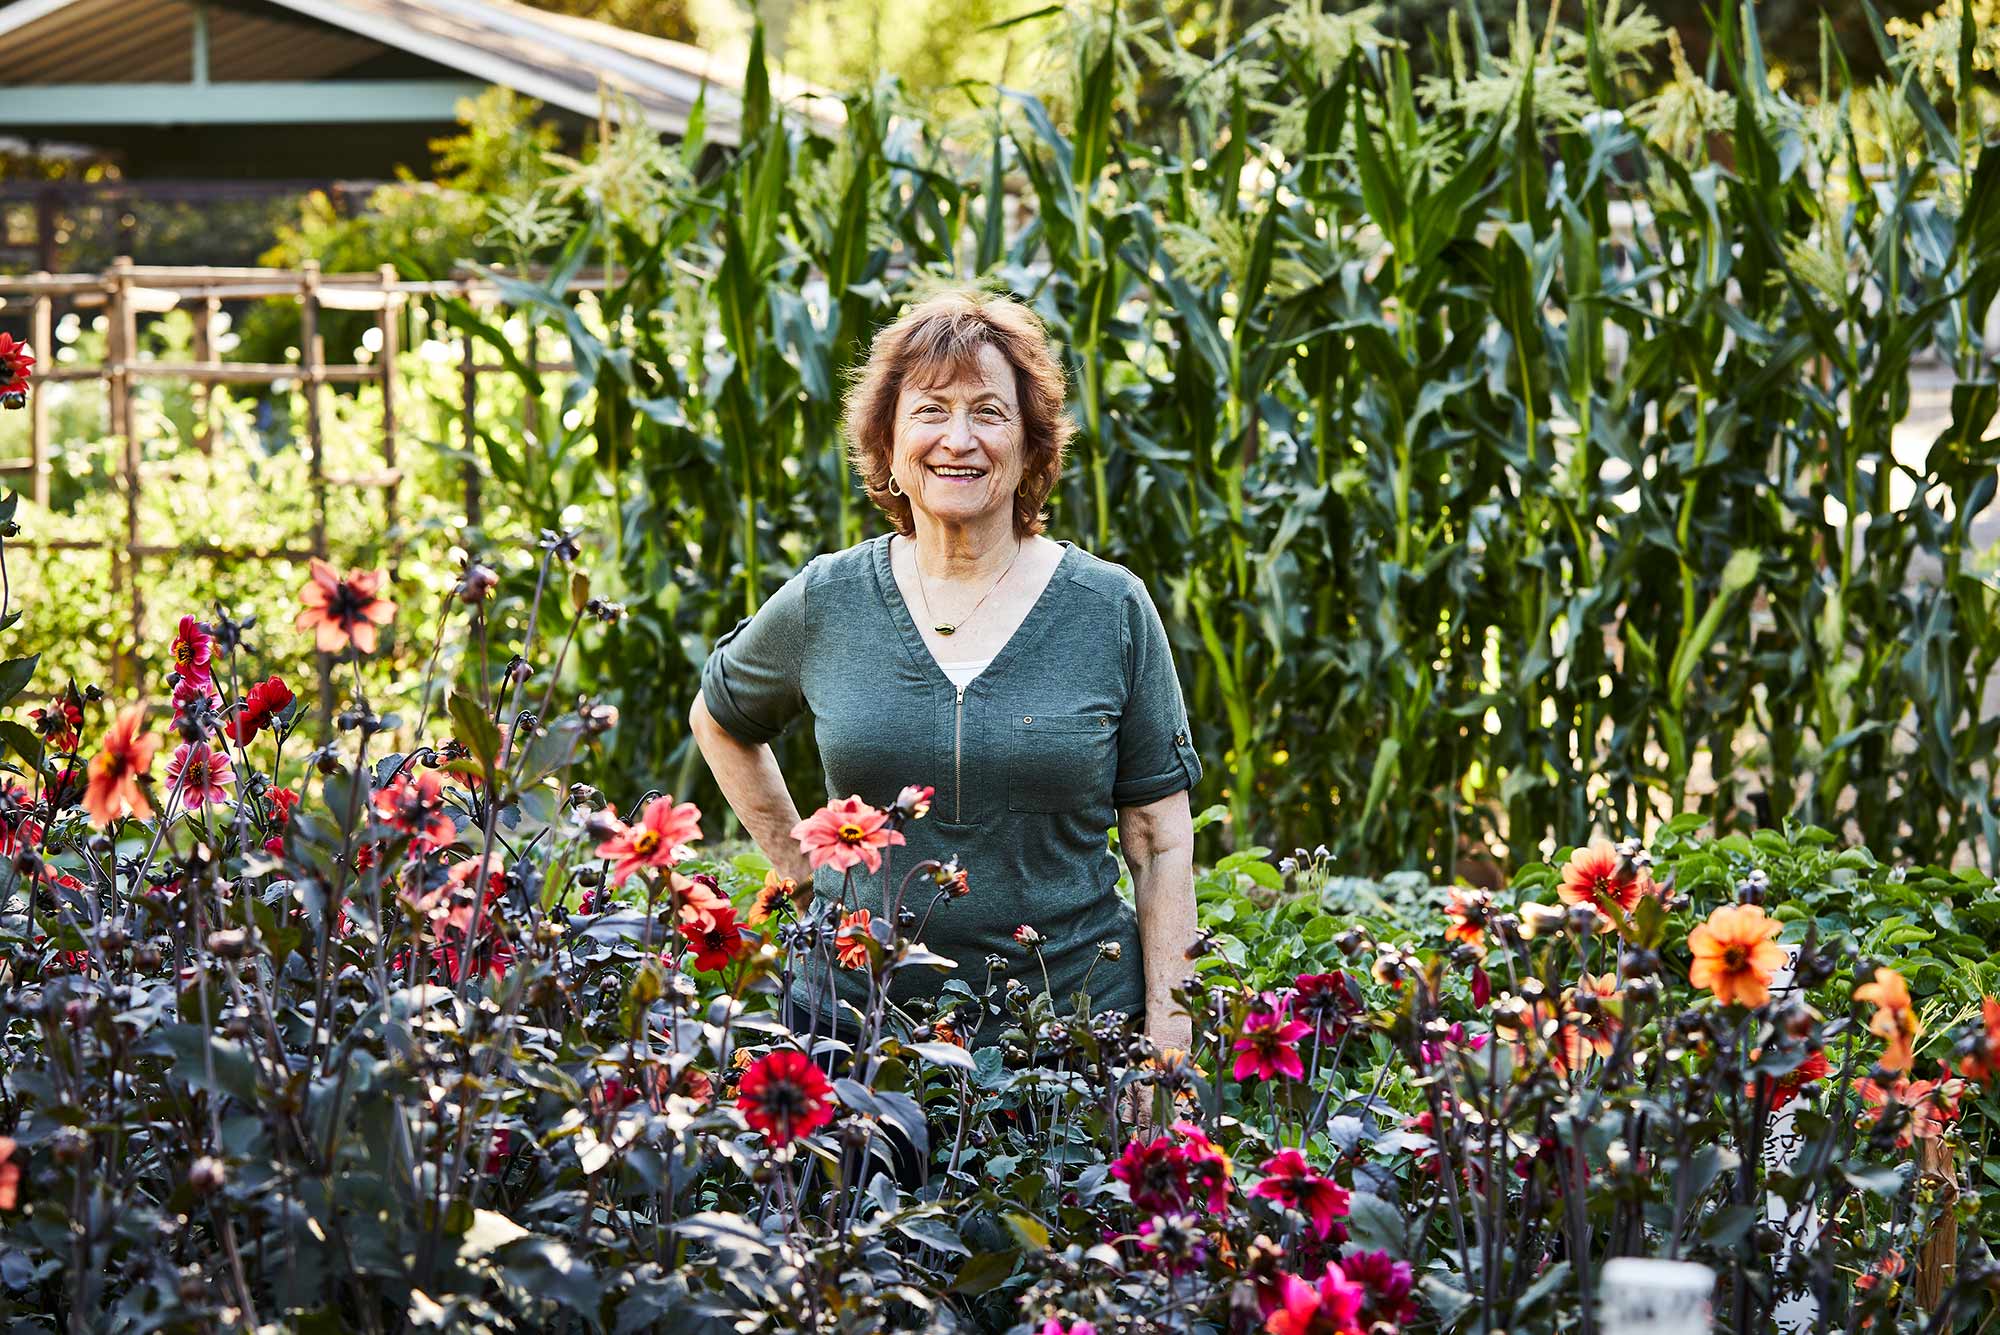 BU alum Renee Shepherd, founder of seed company Renee’s Garden, at her test gardens in Felton, California. She stands with a hand on her hip and smiles, with lots of flowers and plants around.